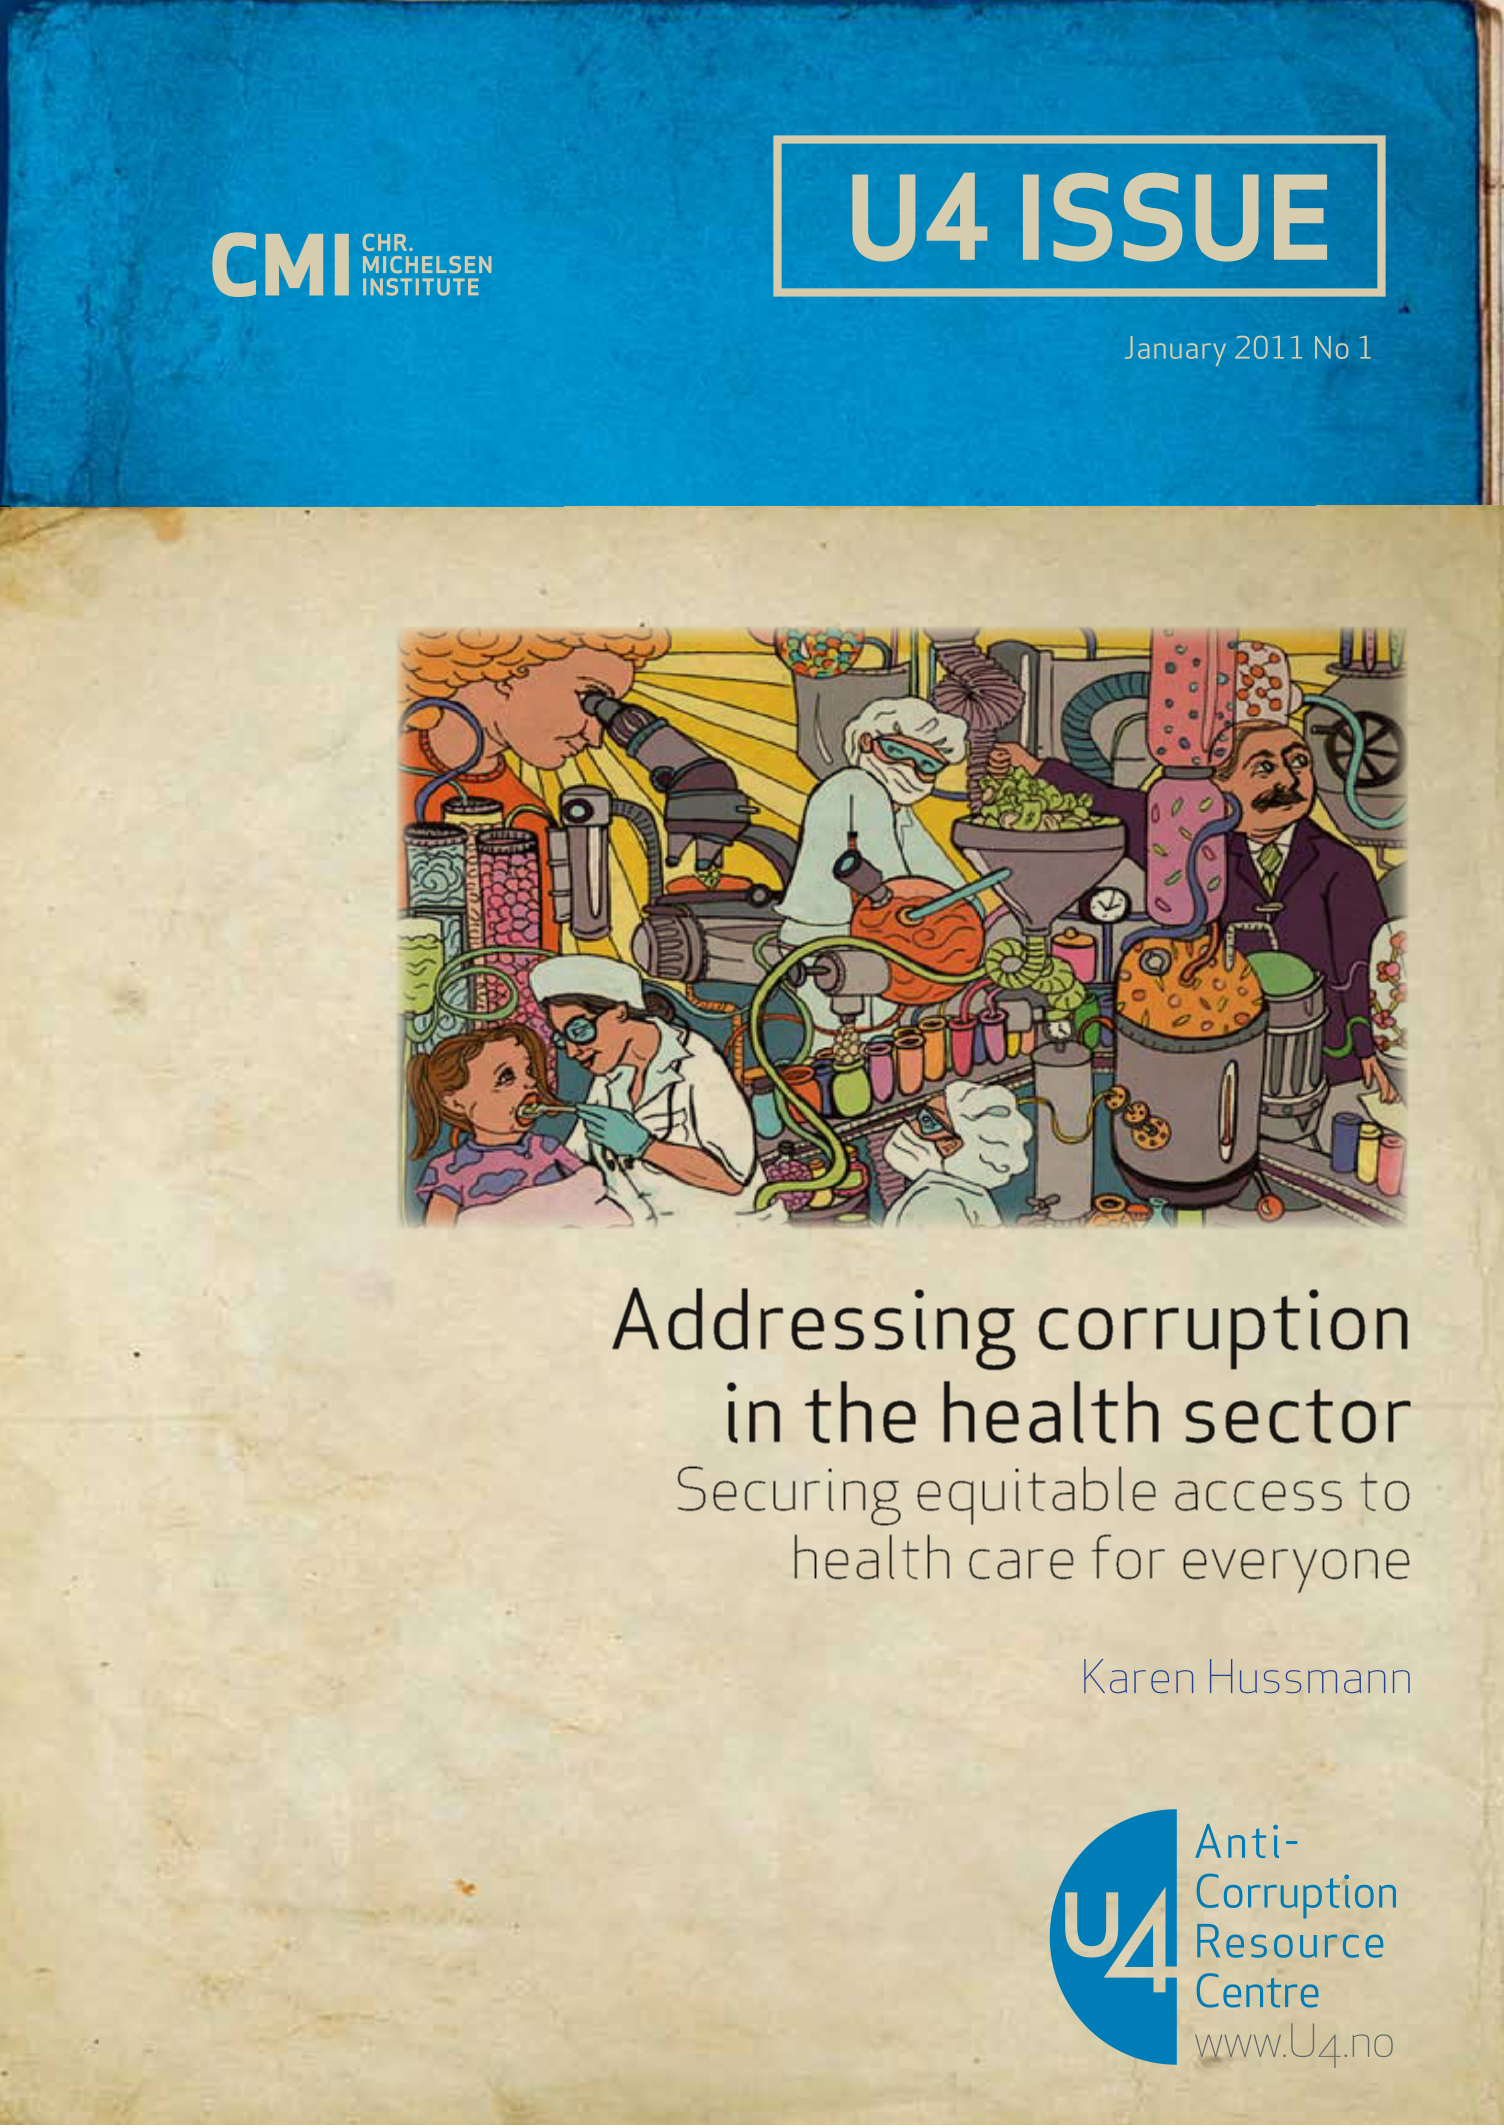 Addressing corruption in the health sector: Securing equitable access to health care for everyone